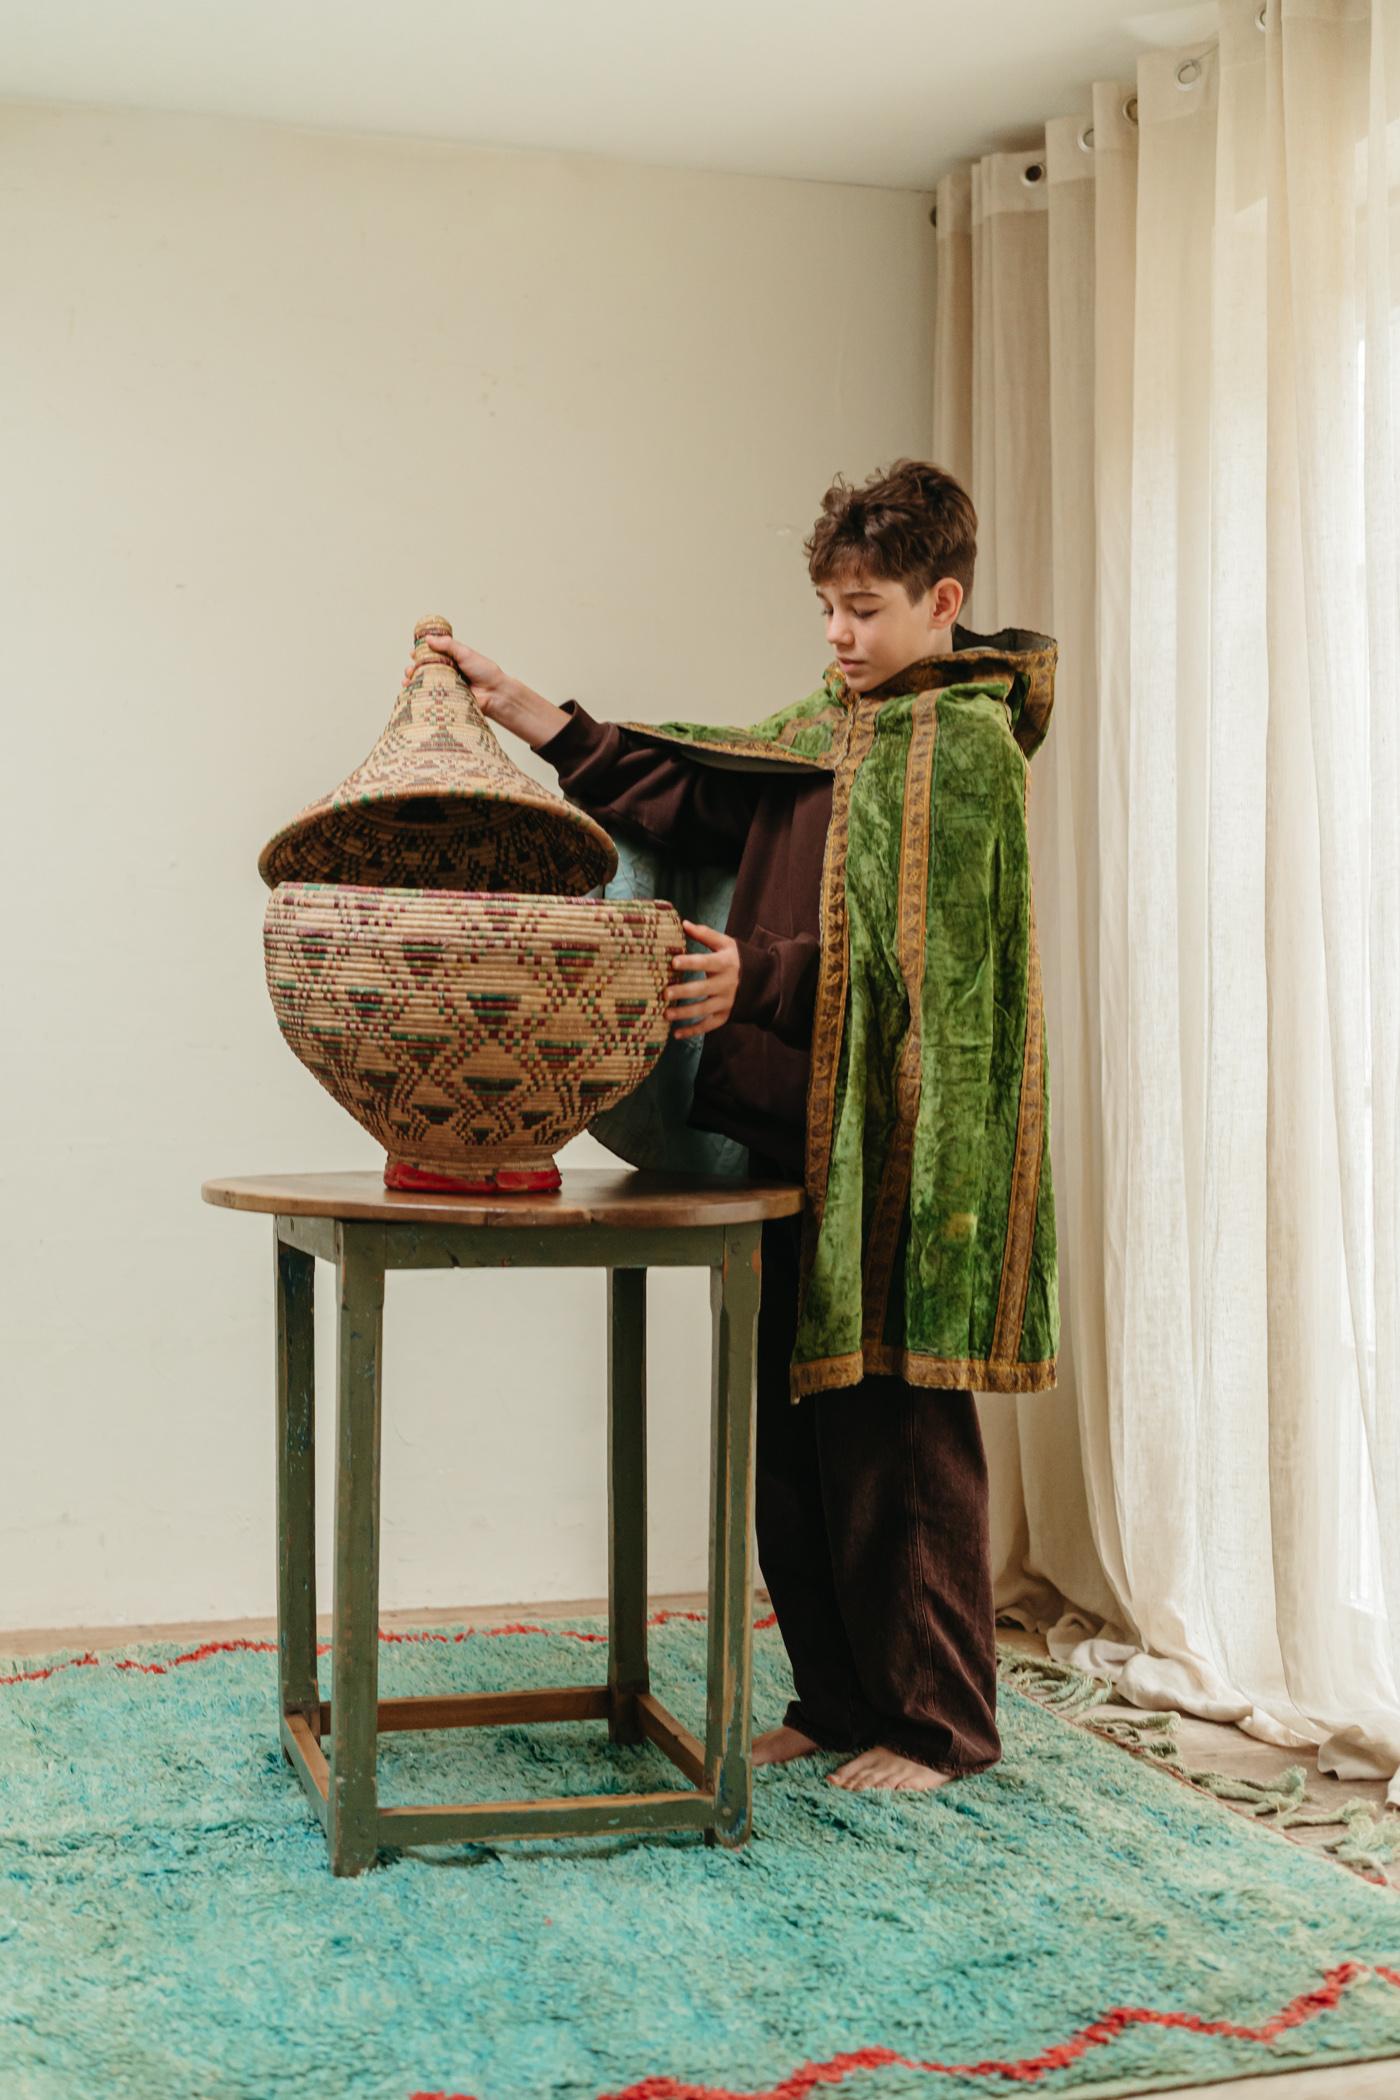 A rare find this 19th century green velvet and goldthread ceremonial jewish cape,
from Morocco.